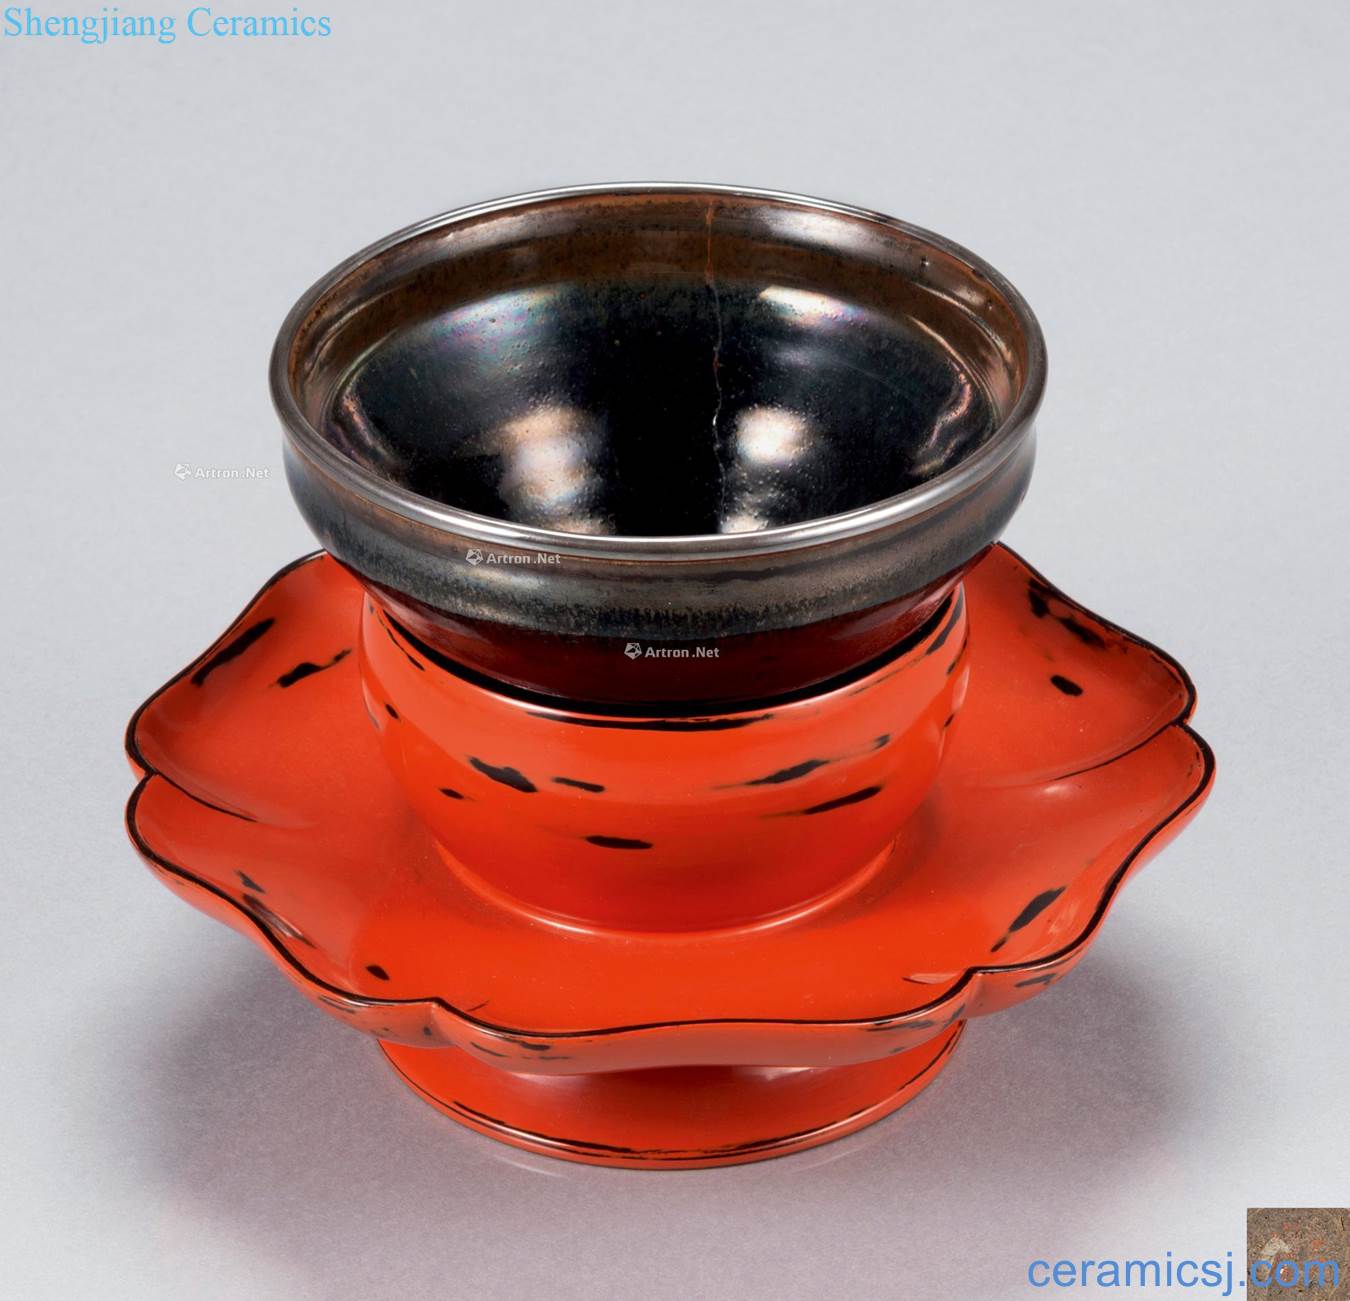 The song dynasty To build kilns temmoku ash was bowl with red paint temmoku